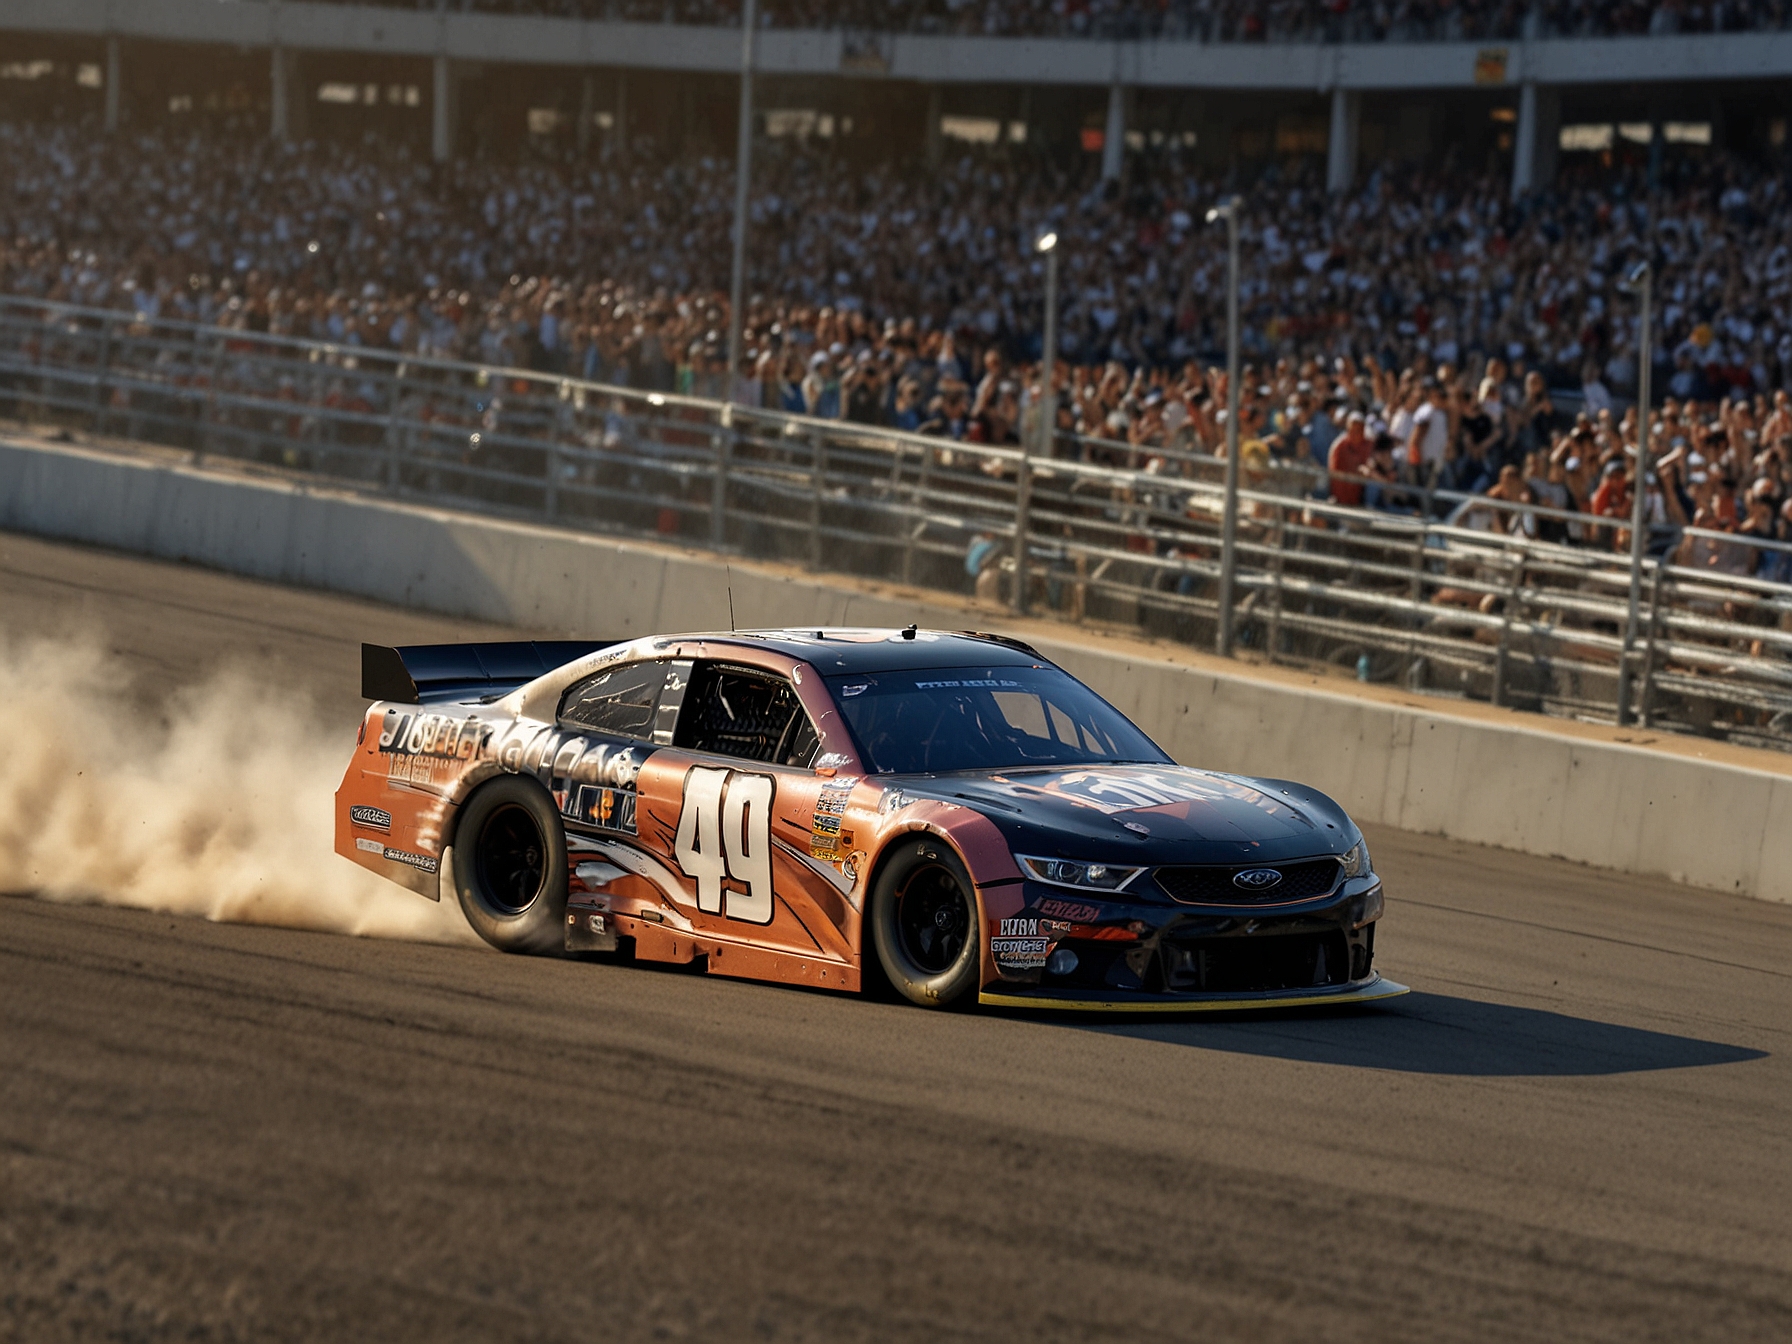 A dynamic image of Chase Briscoe racing for Stewart-Haas Racing. The potential move to Joe Gibbs Racing could significantly impact his career and the competitive balance within NASCAR.